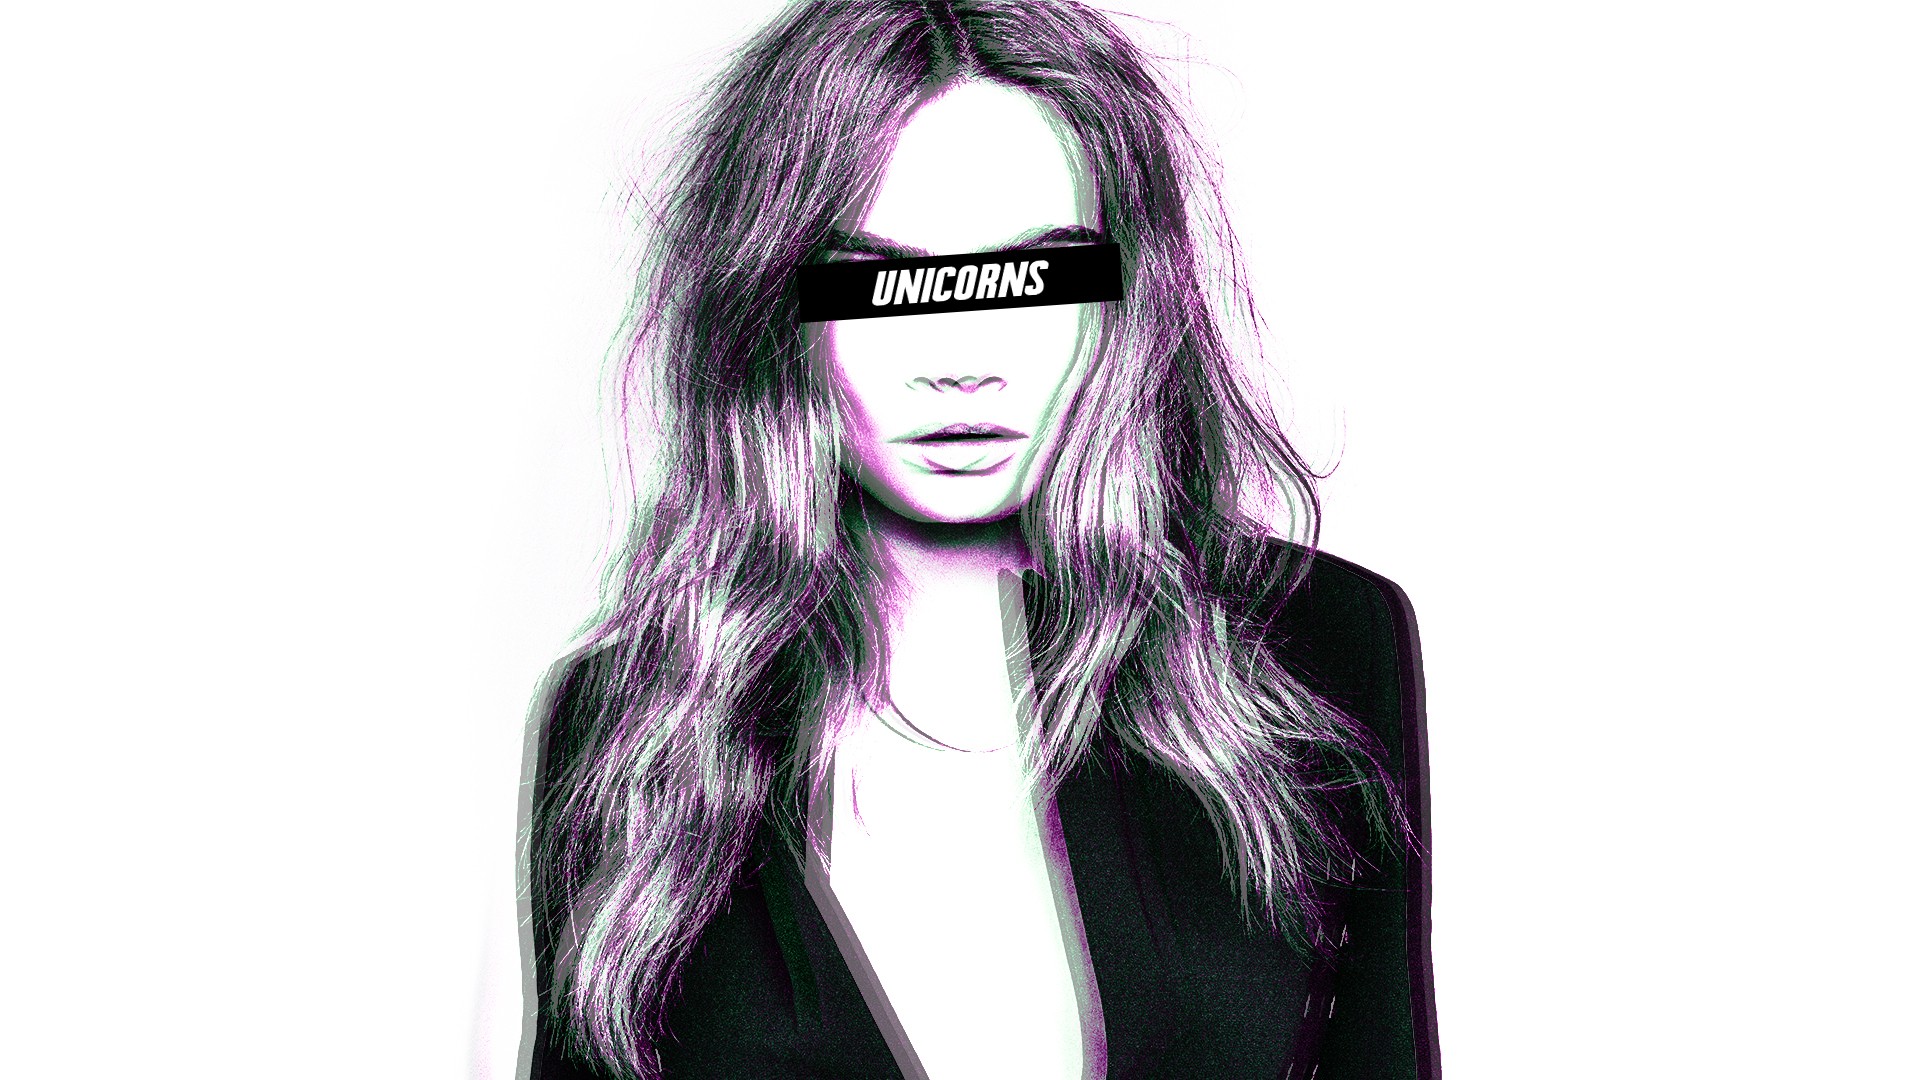 women, Cara Delevingne, Photoshopped, Abstract, Anaglyph 3D, Censored Wallpaper